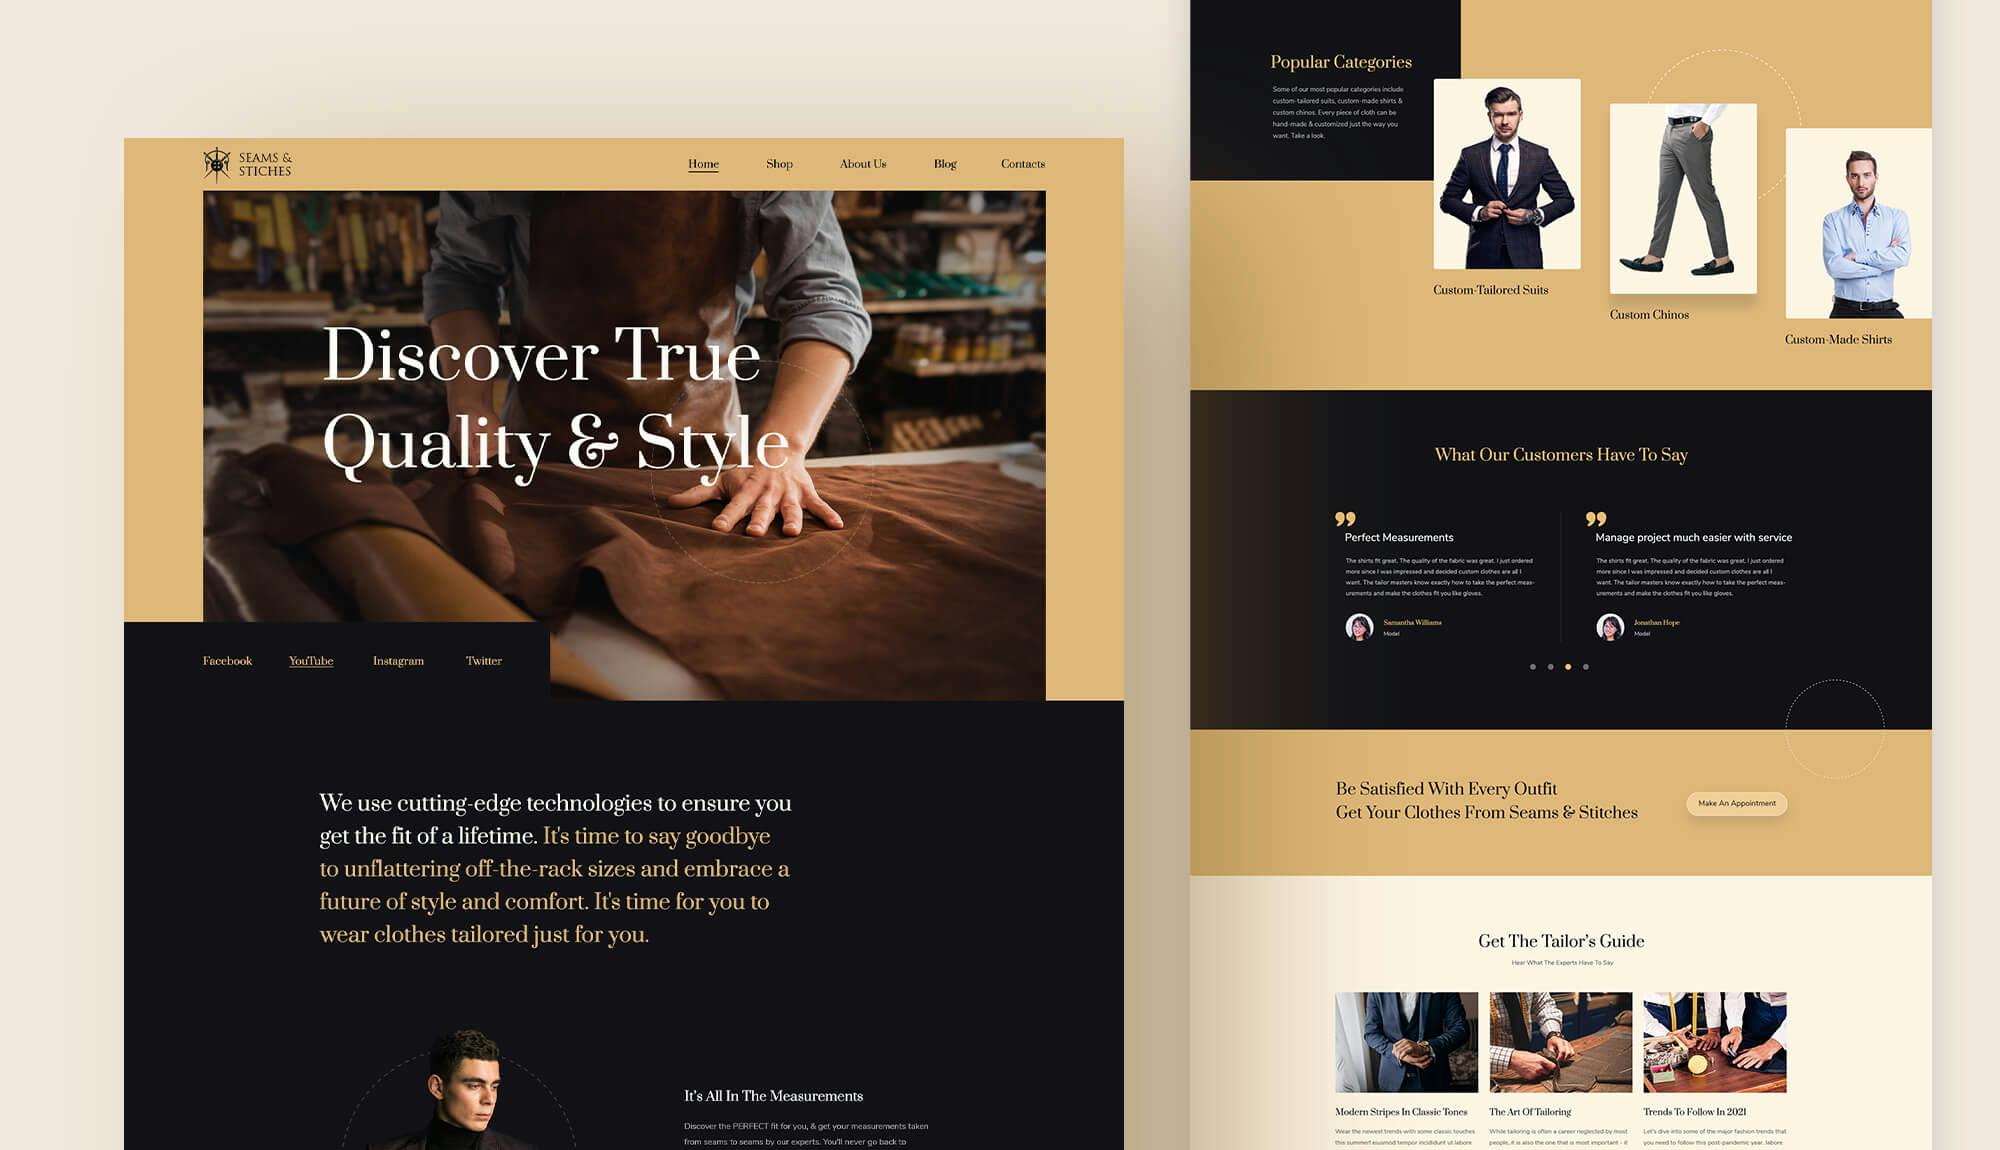 Seams & Stitches - Tailor Shop Website Template Banner